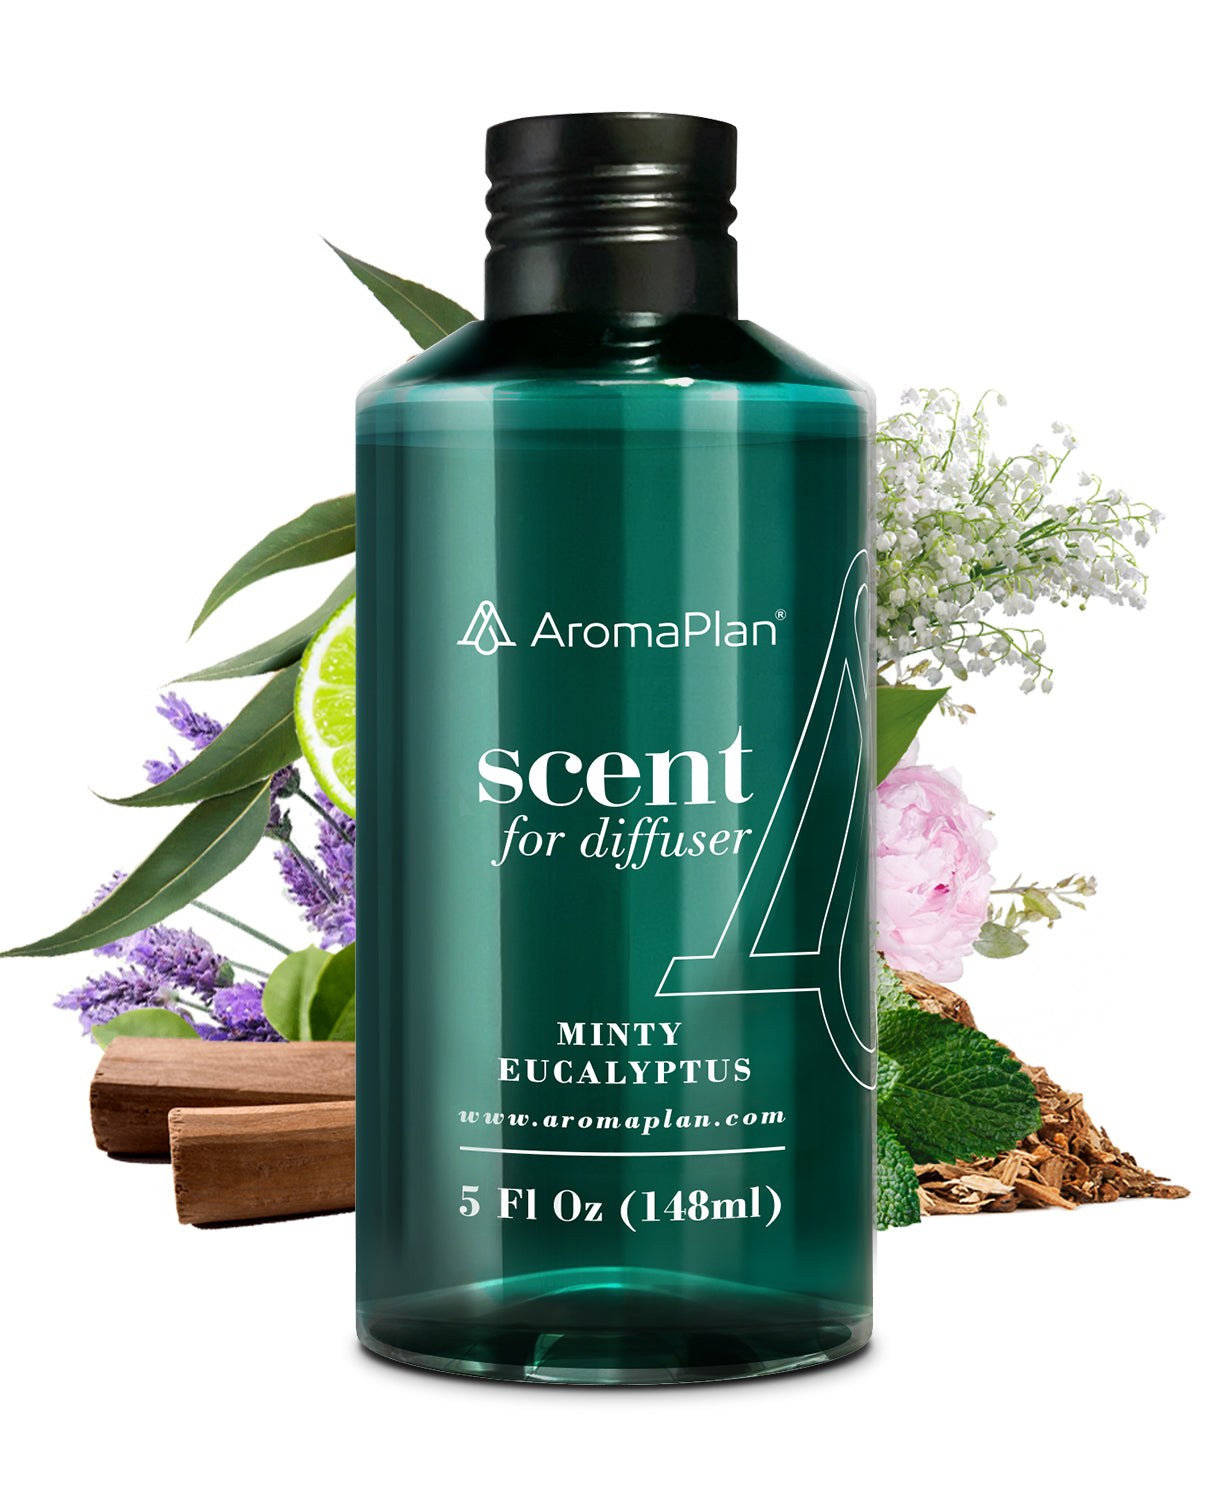 Discover the Scent Minty Eucalyptus Fragrance - Aroma Oil for Scent Diffusers - Natural &amp; Vegan - Essential Oil Blends for Diffuser - Size: 5 Fl Oz. (148ml)